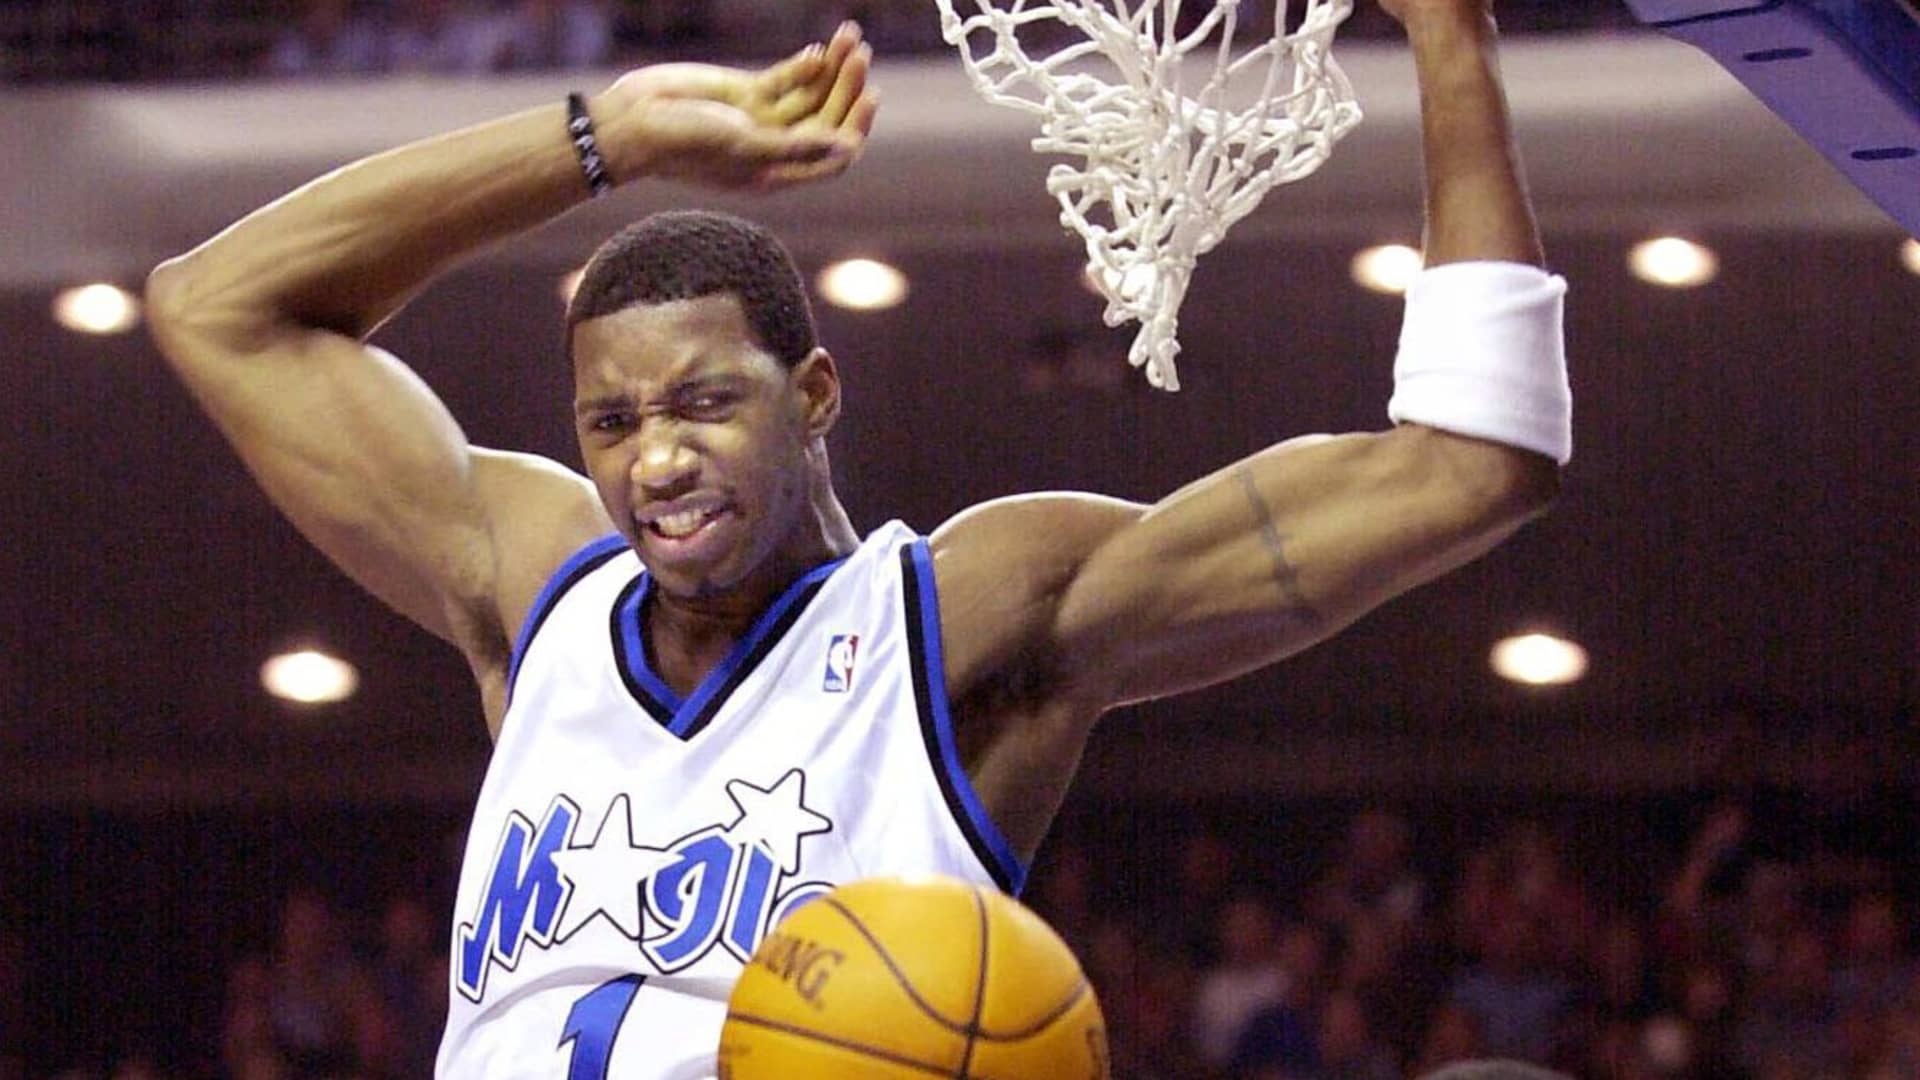 Orlando Magic guard Tracy McGrady (1) slam dunks the ball past Washington Wizards' guard Rod Strickland during the second period of the game at the TD Waterhouse Centre in Orlando, 31, October 2000.